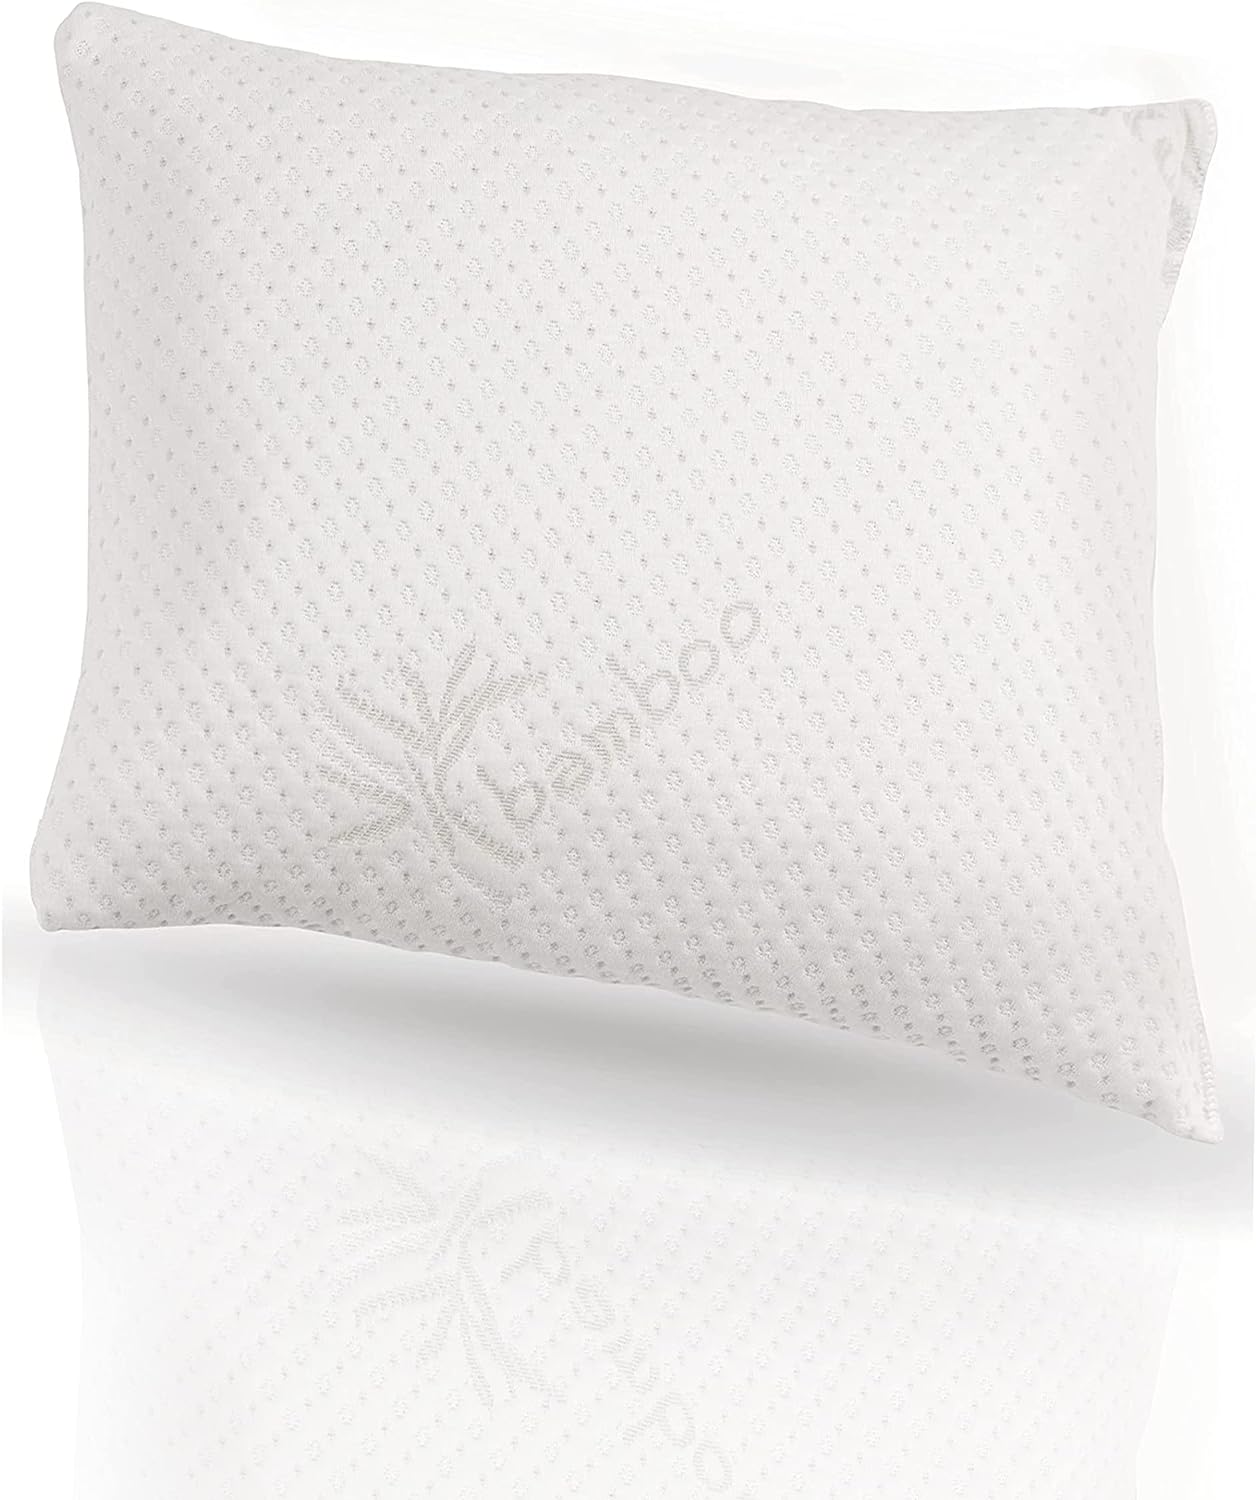 My toddlers love this pillow! Made well!Easy to clean and soft